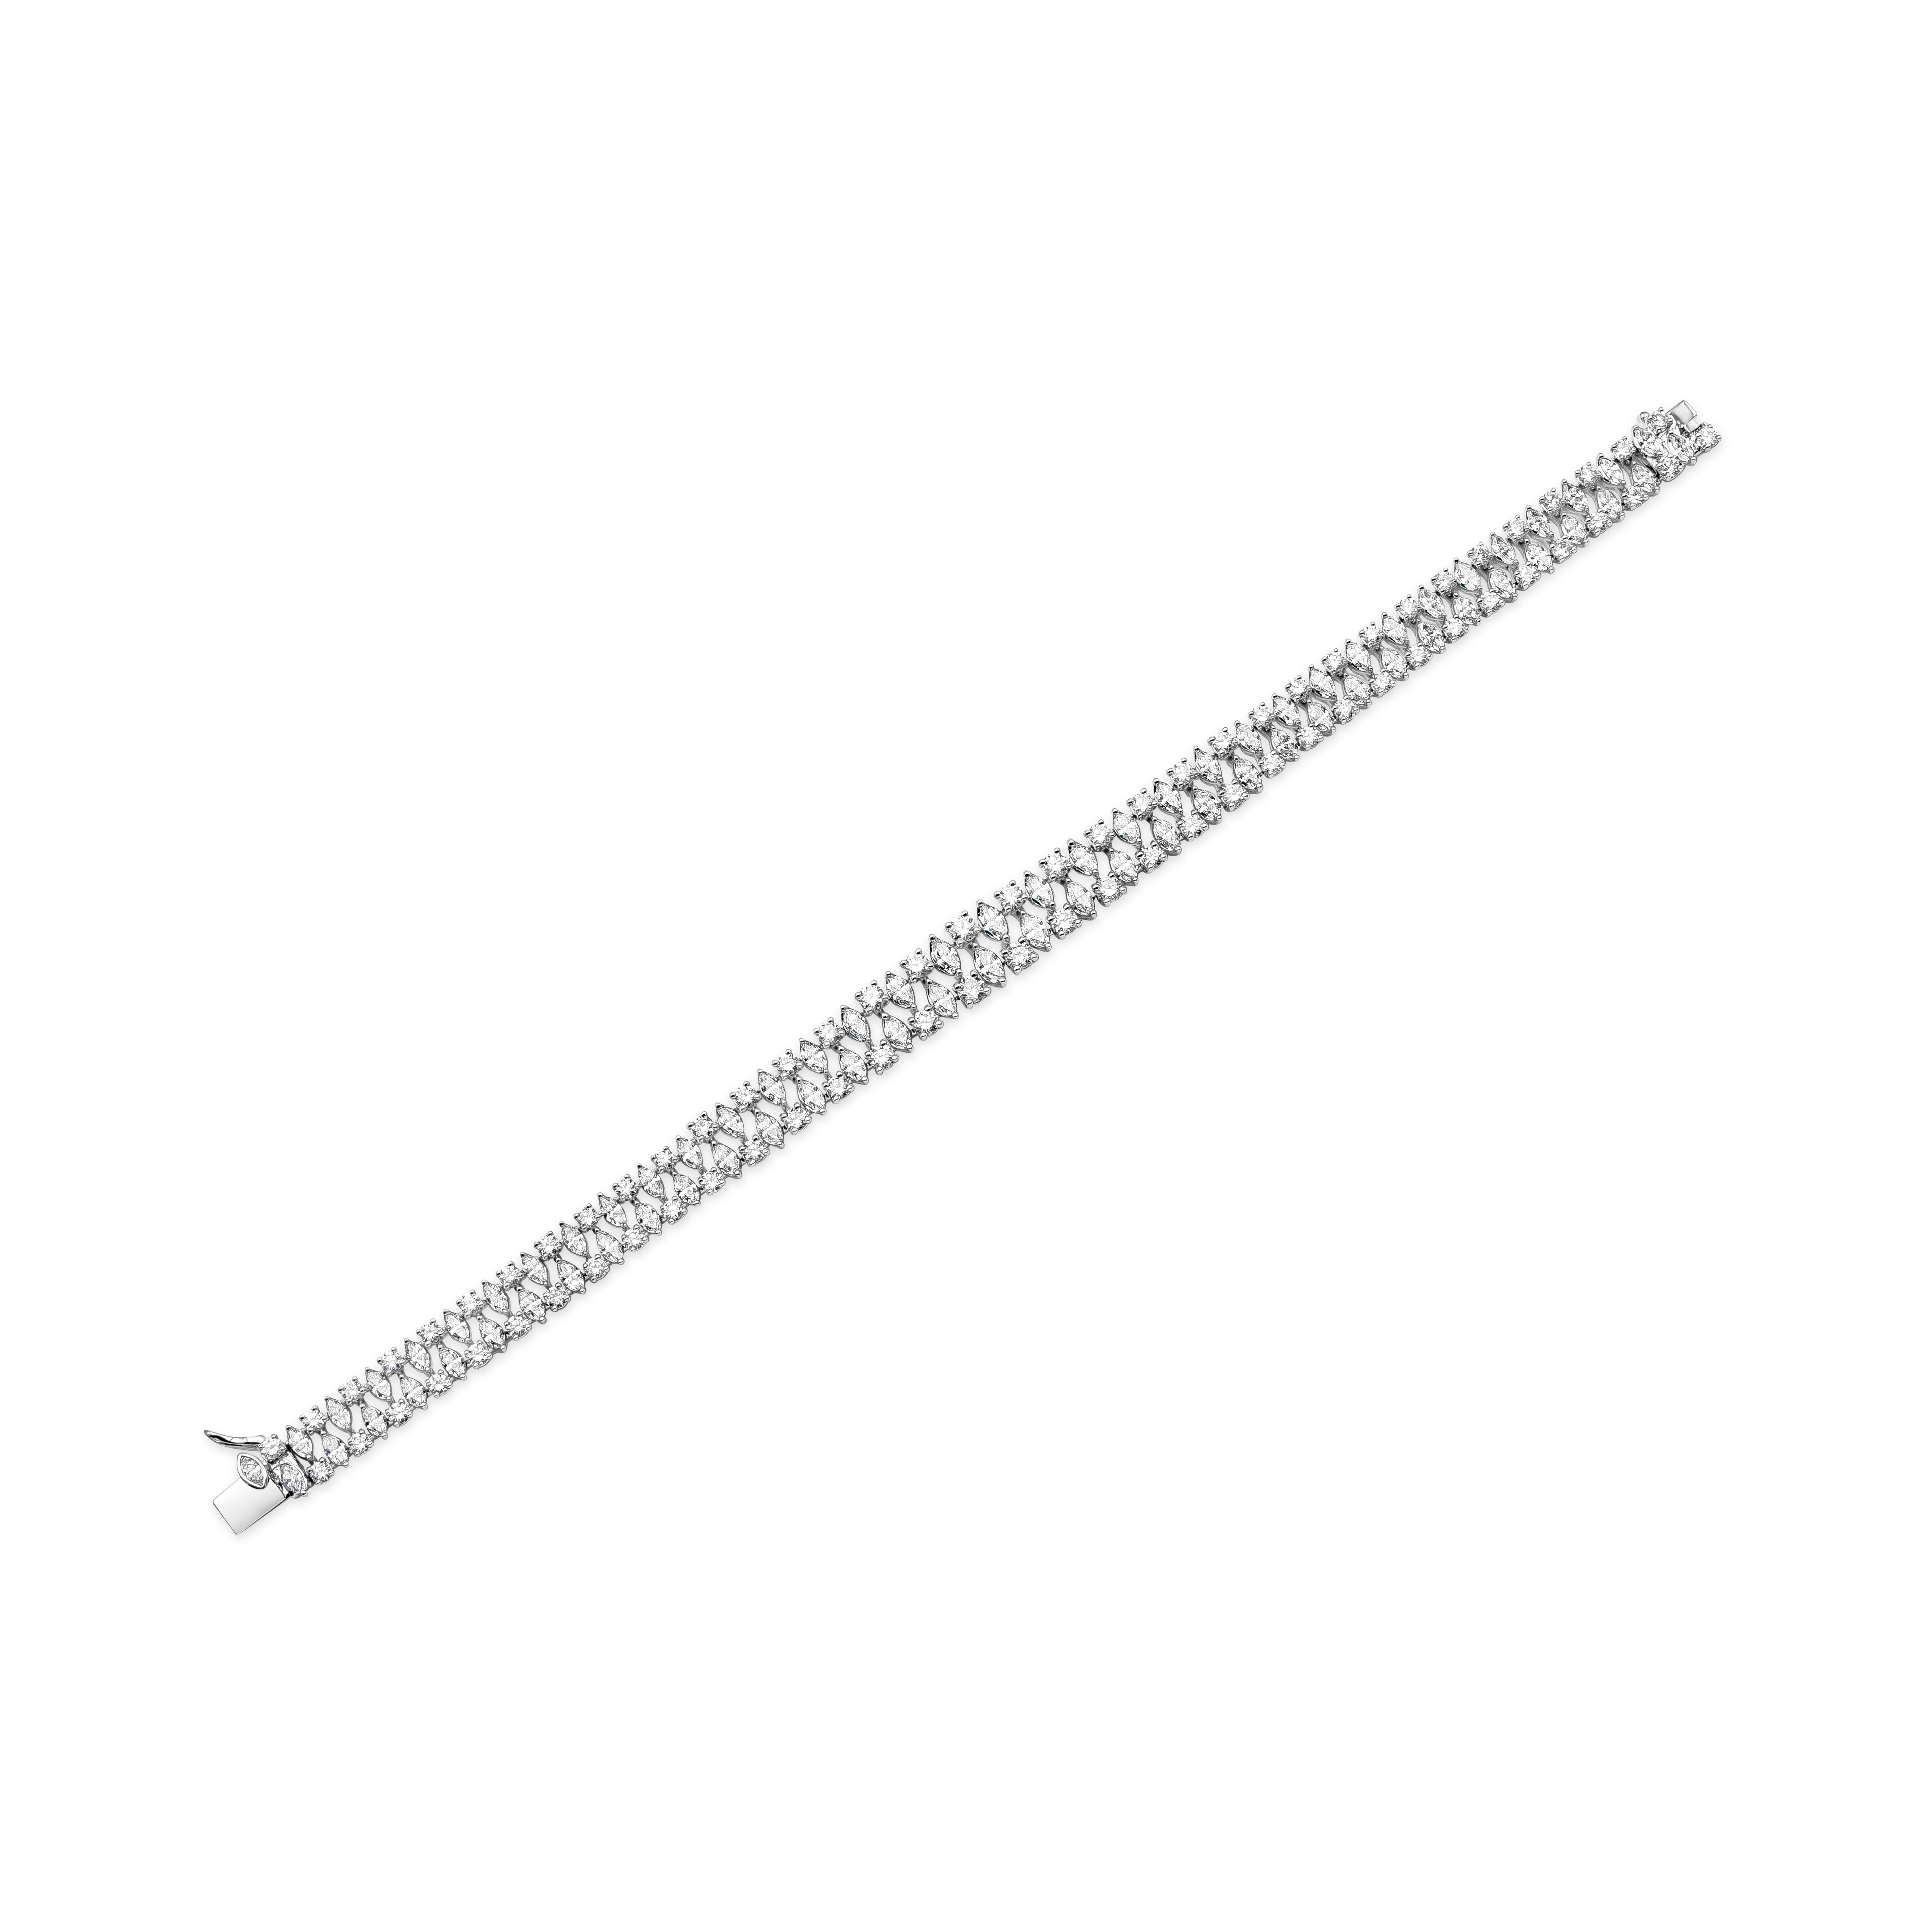 This elegant diamond bracelet showcase a row of round and marquise cut diamonds that weighs 7.33 carats total. The length of this elegant bracelet is 182mm while the width is 6mm - 8mm and weighs 24.60 grams. Made with 18K White Gold.

Roman Malakov